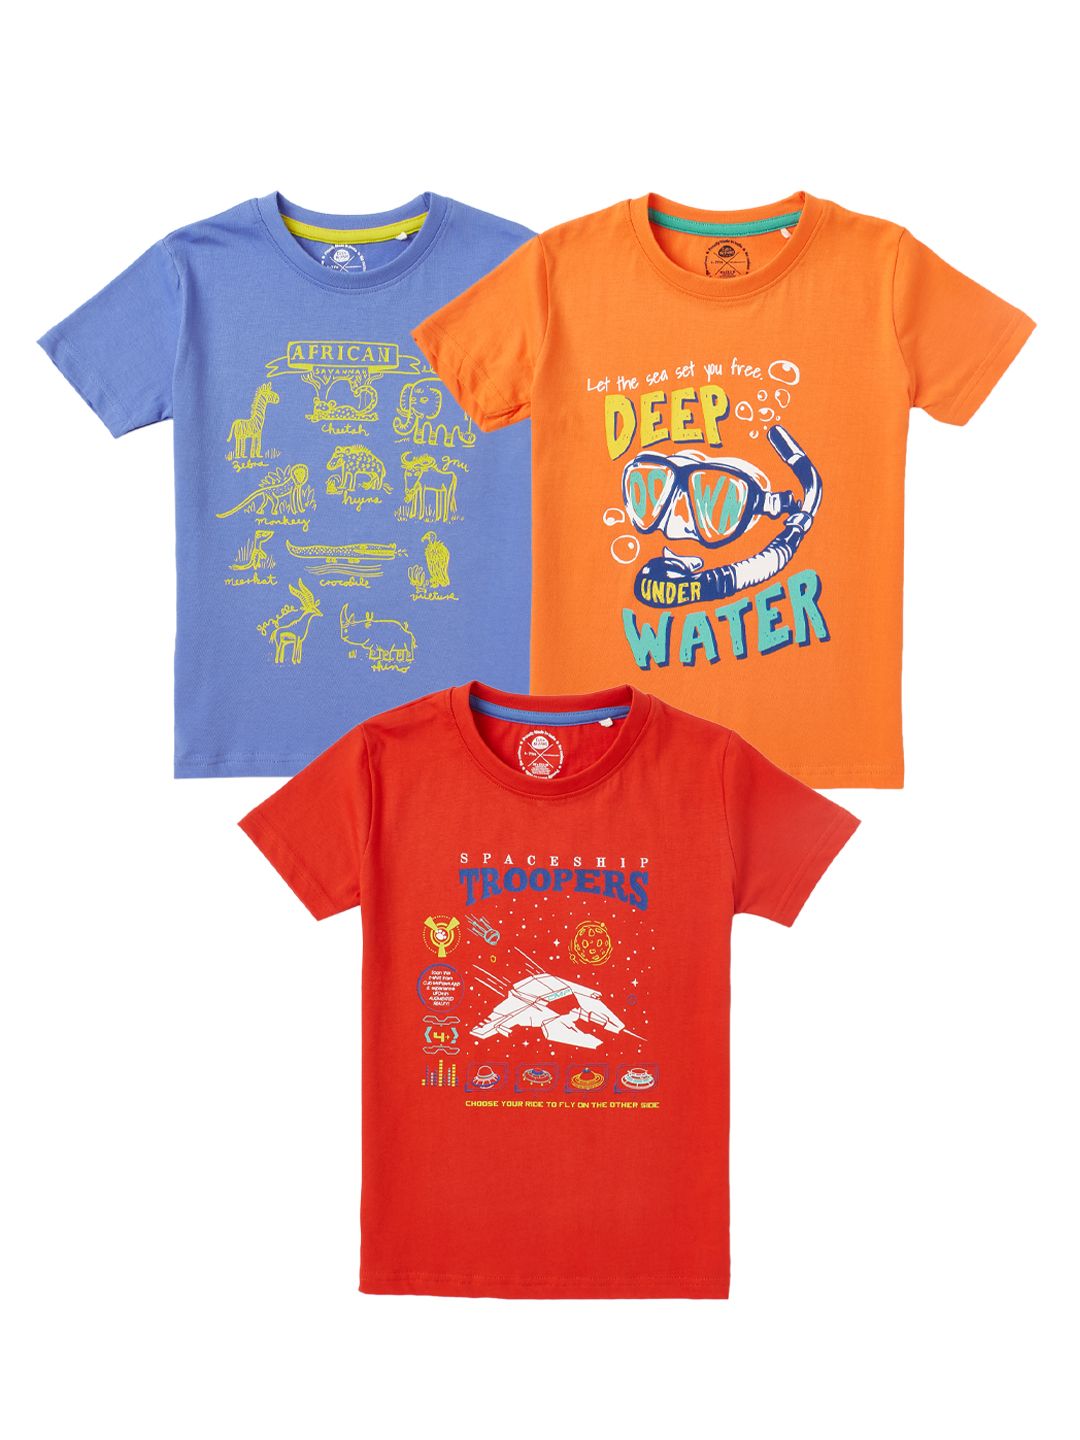 Boys Pack of 3 T-Shirts Half Sleeves,(includes 1 Magic T-shirt)